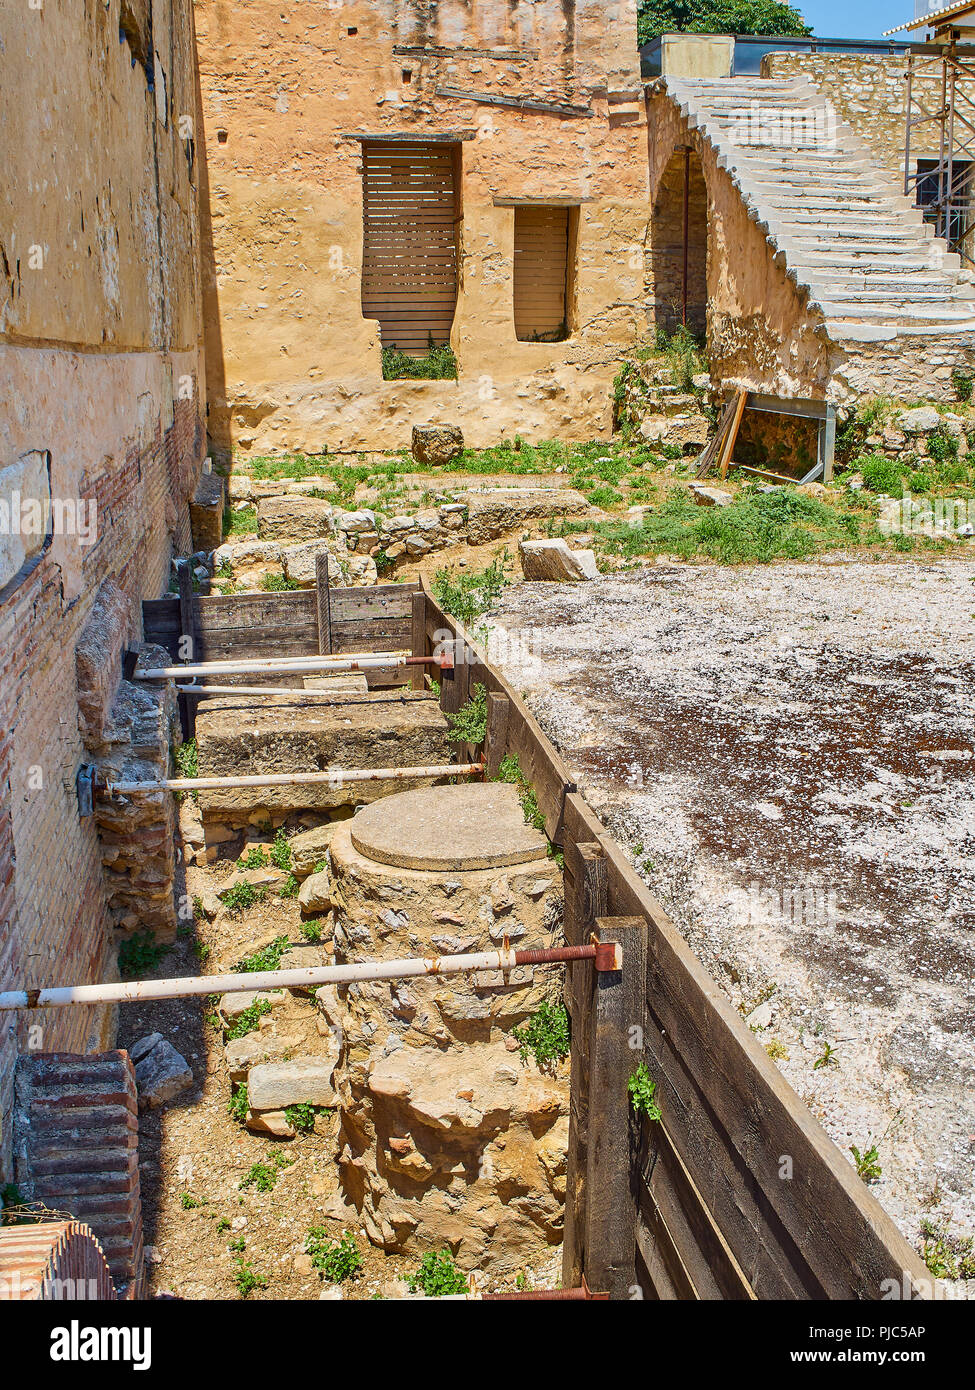 Remains of Greek sewage system of the Hadrian's Library in Athens, Attica region, Greece. Stock Photo